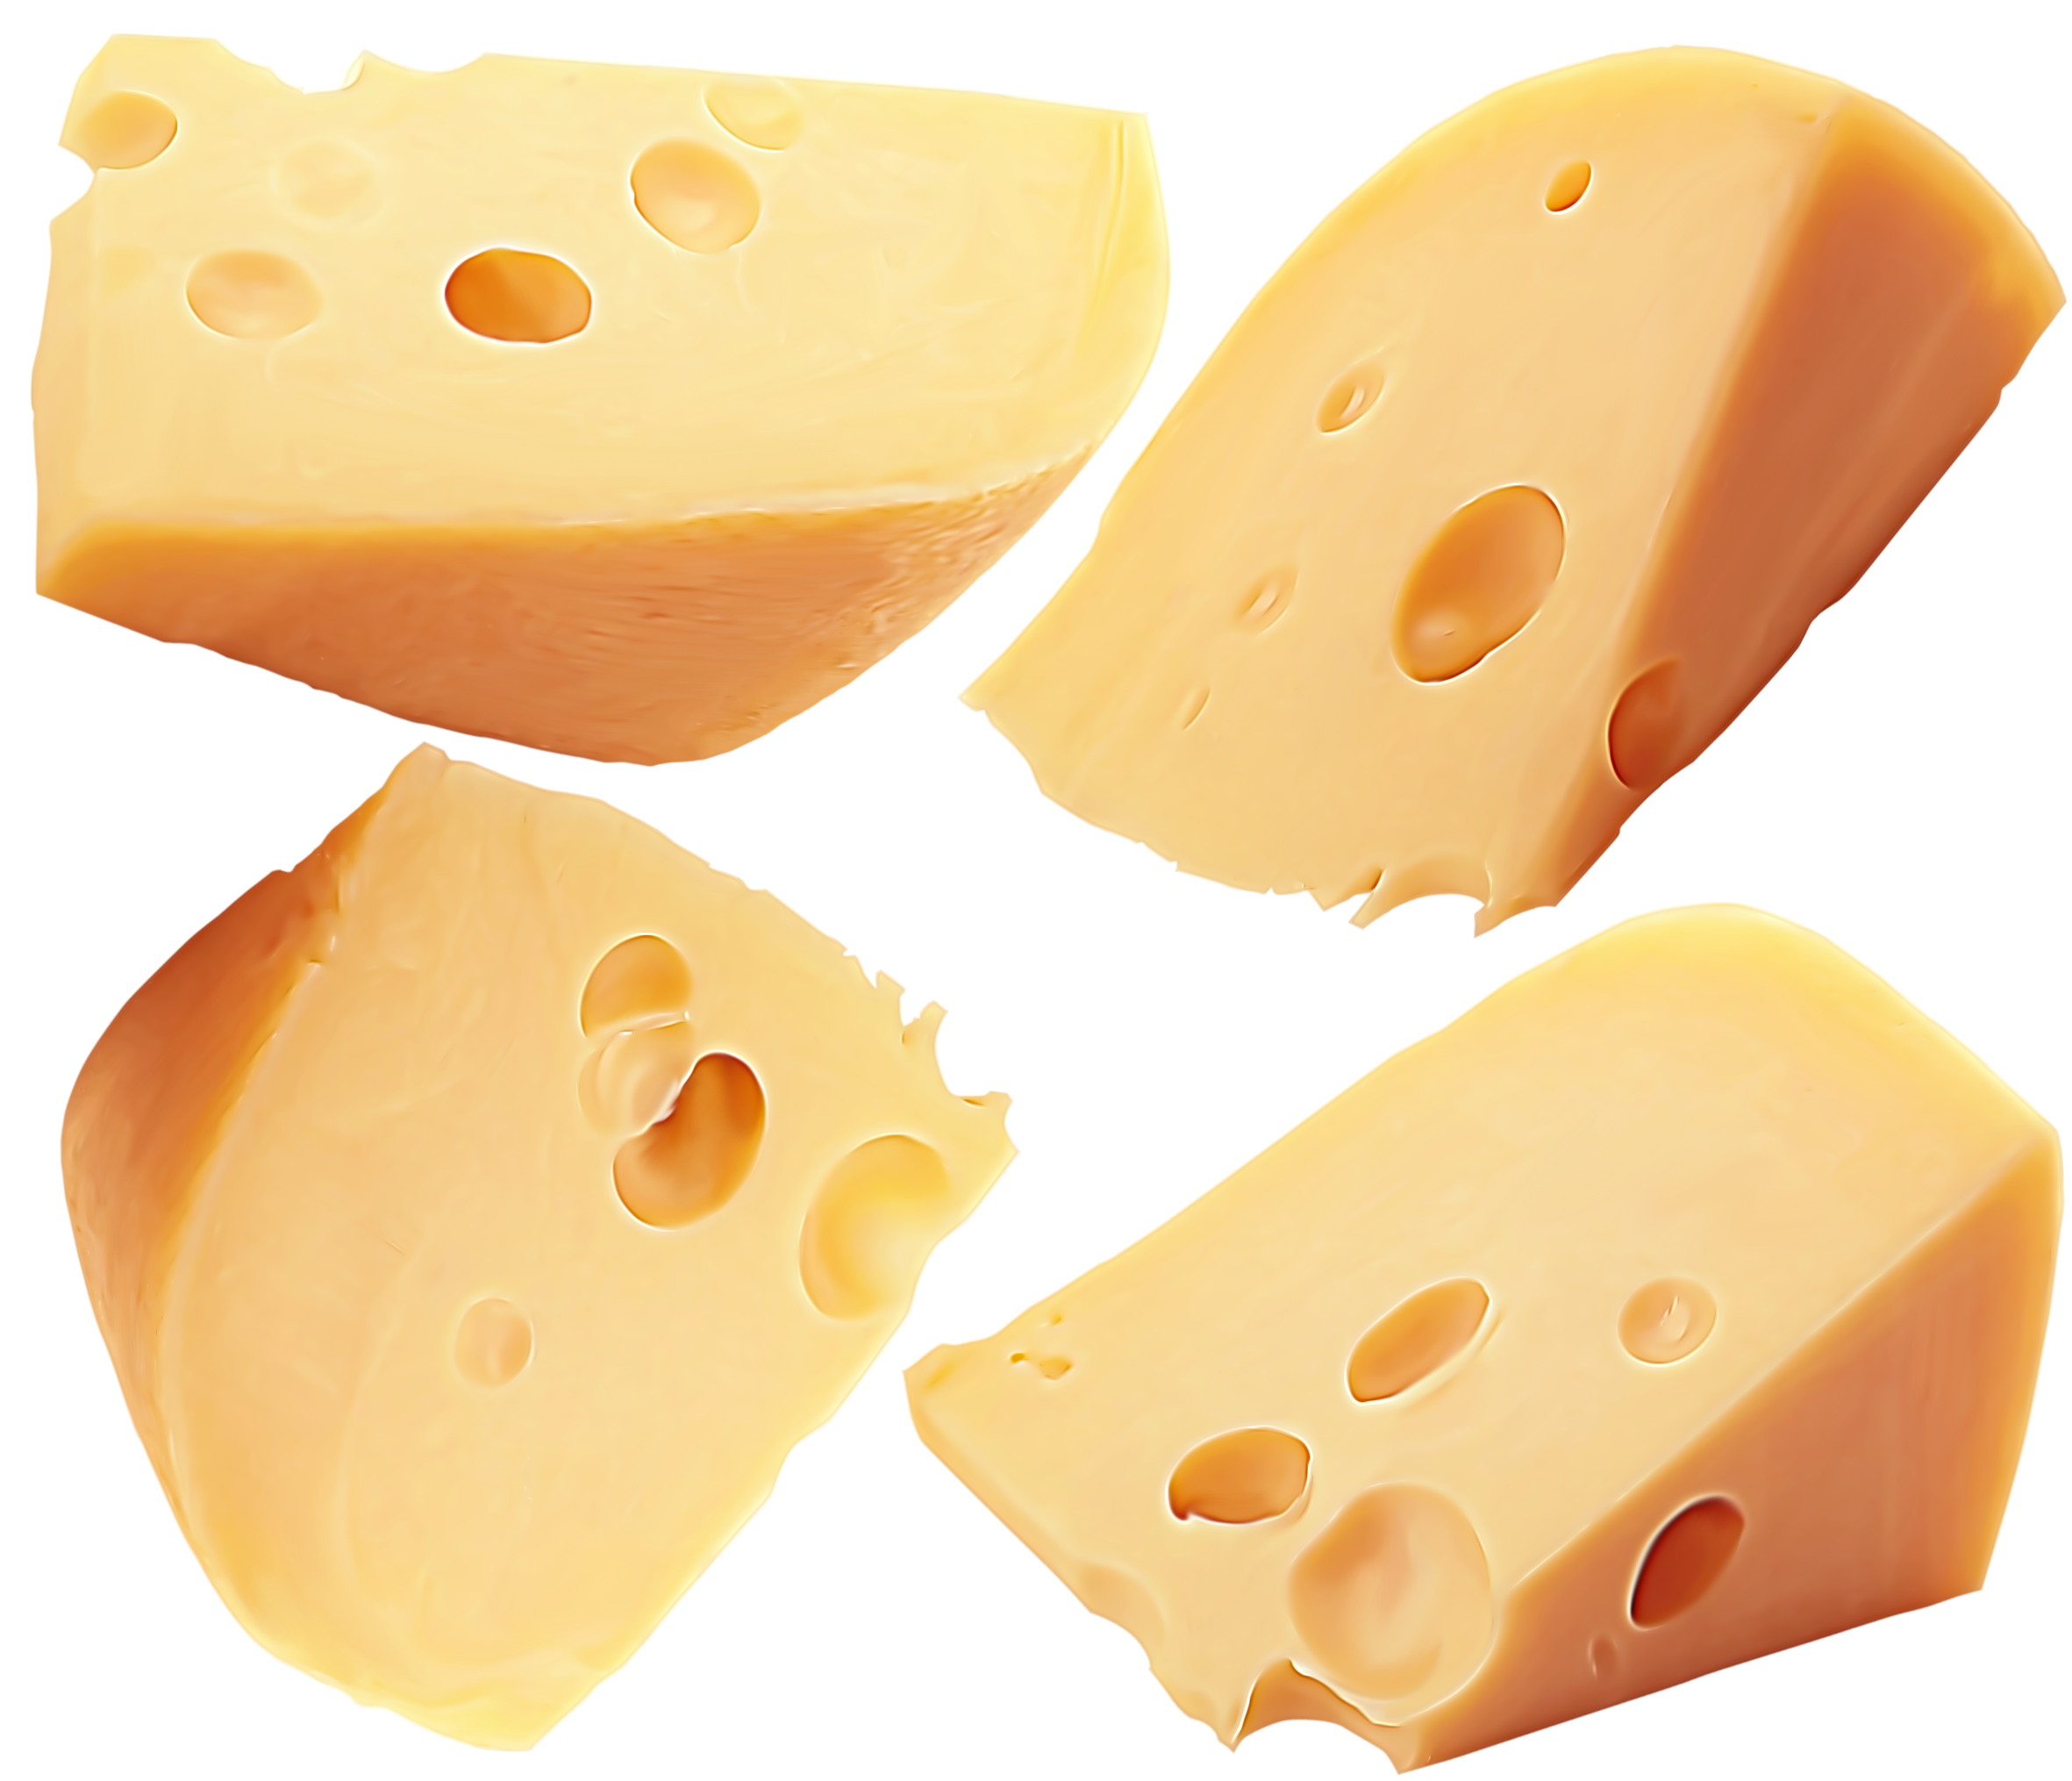 Cheese Slices Png Png Image Collection